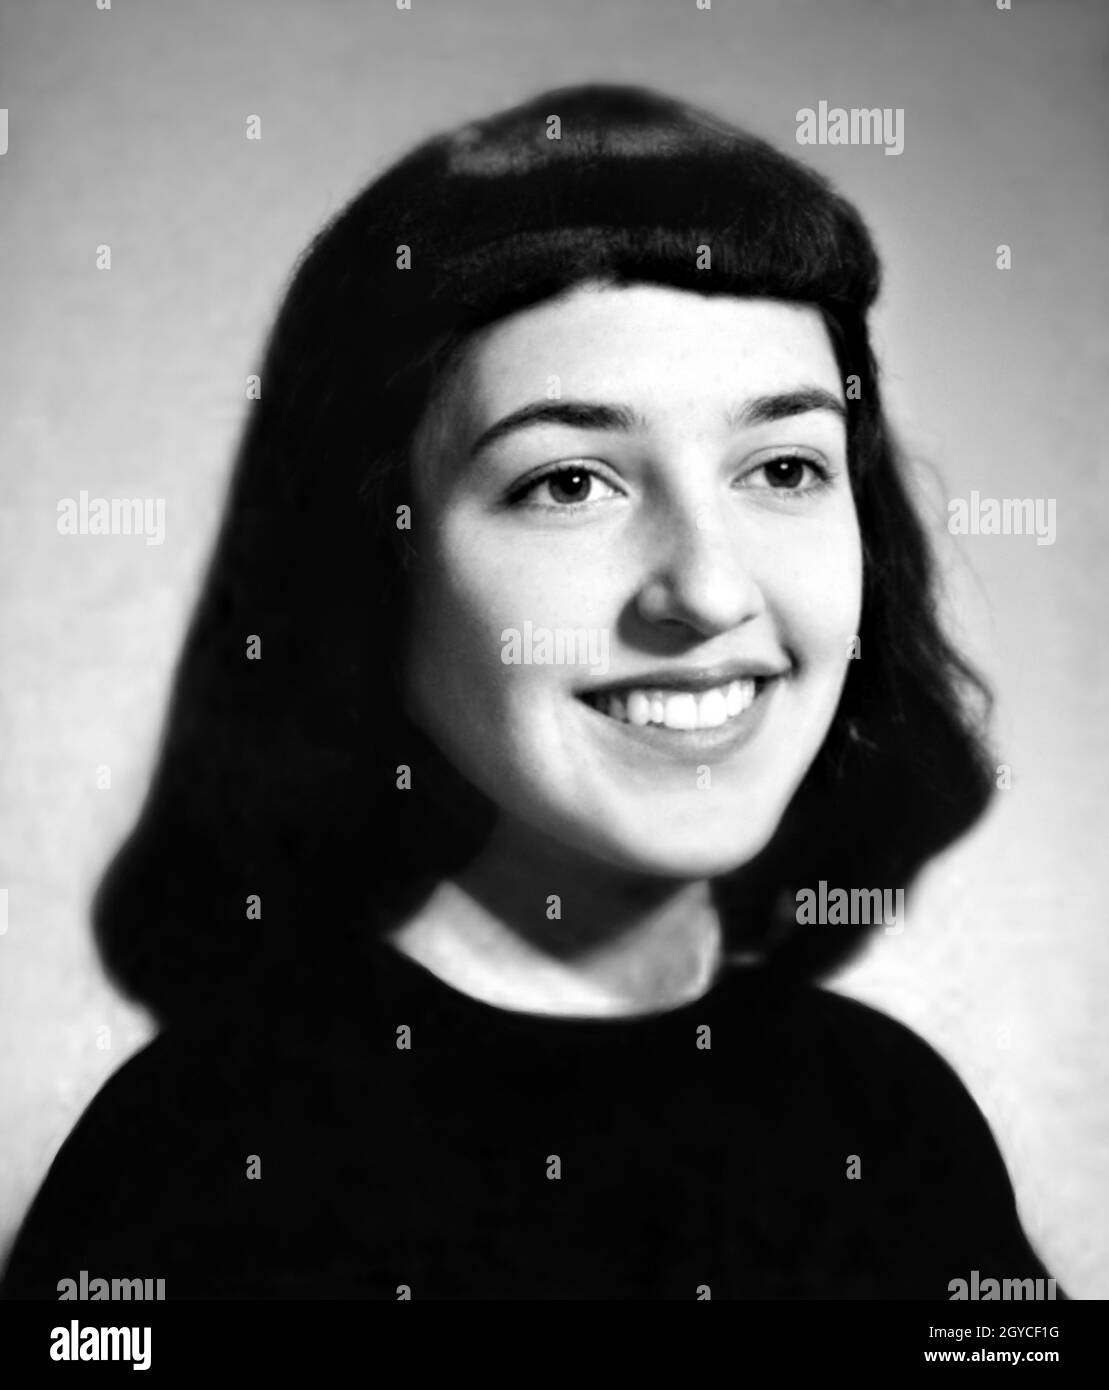 1958 , Palo Alto , California ,  USA : The celebrated american Folk singer JOAN BAEZ ( born 9 january 1941 ) when was a young girl aged 17 , photo pubblished in the Palo Alto High School Senior Yearbook annuary . Unknown photographer. - HISTORY - FOTO STORICHE - personalità da giovane giovani - ragazza - personality personalities when was young girl - INFANZIA - CHILDHOOD - POP MUSIC - MUSICA - cantante - TEENAGER - RAGAZZA - CHILDHOOD - INFANZIA - smile - sorriso --- ARCHIVIO GBB Stock Photo